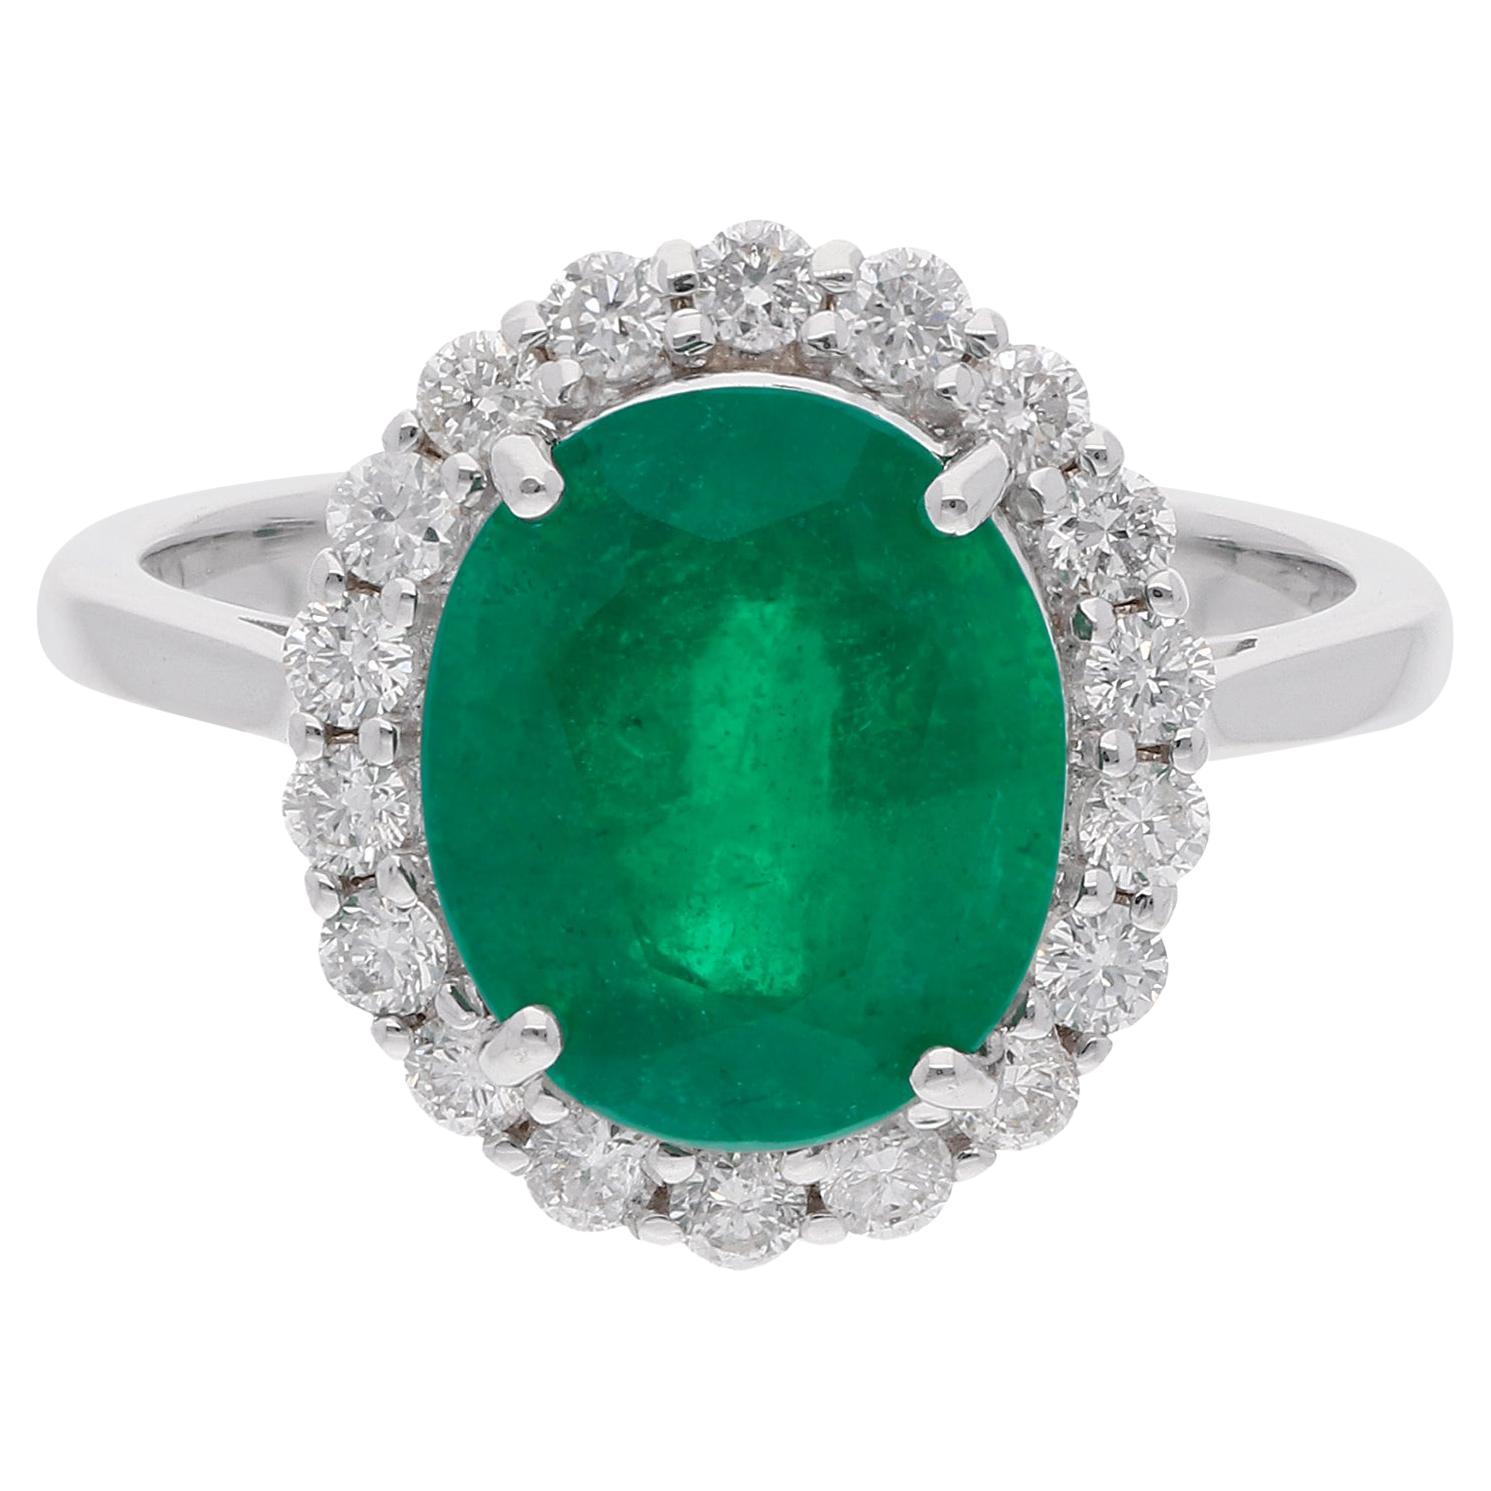 Oval Natural Emerald Gemstone Cocktail Ring Diamond 18 Karat White Gold Jewelry For Sale